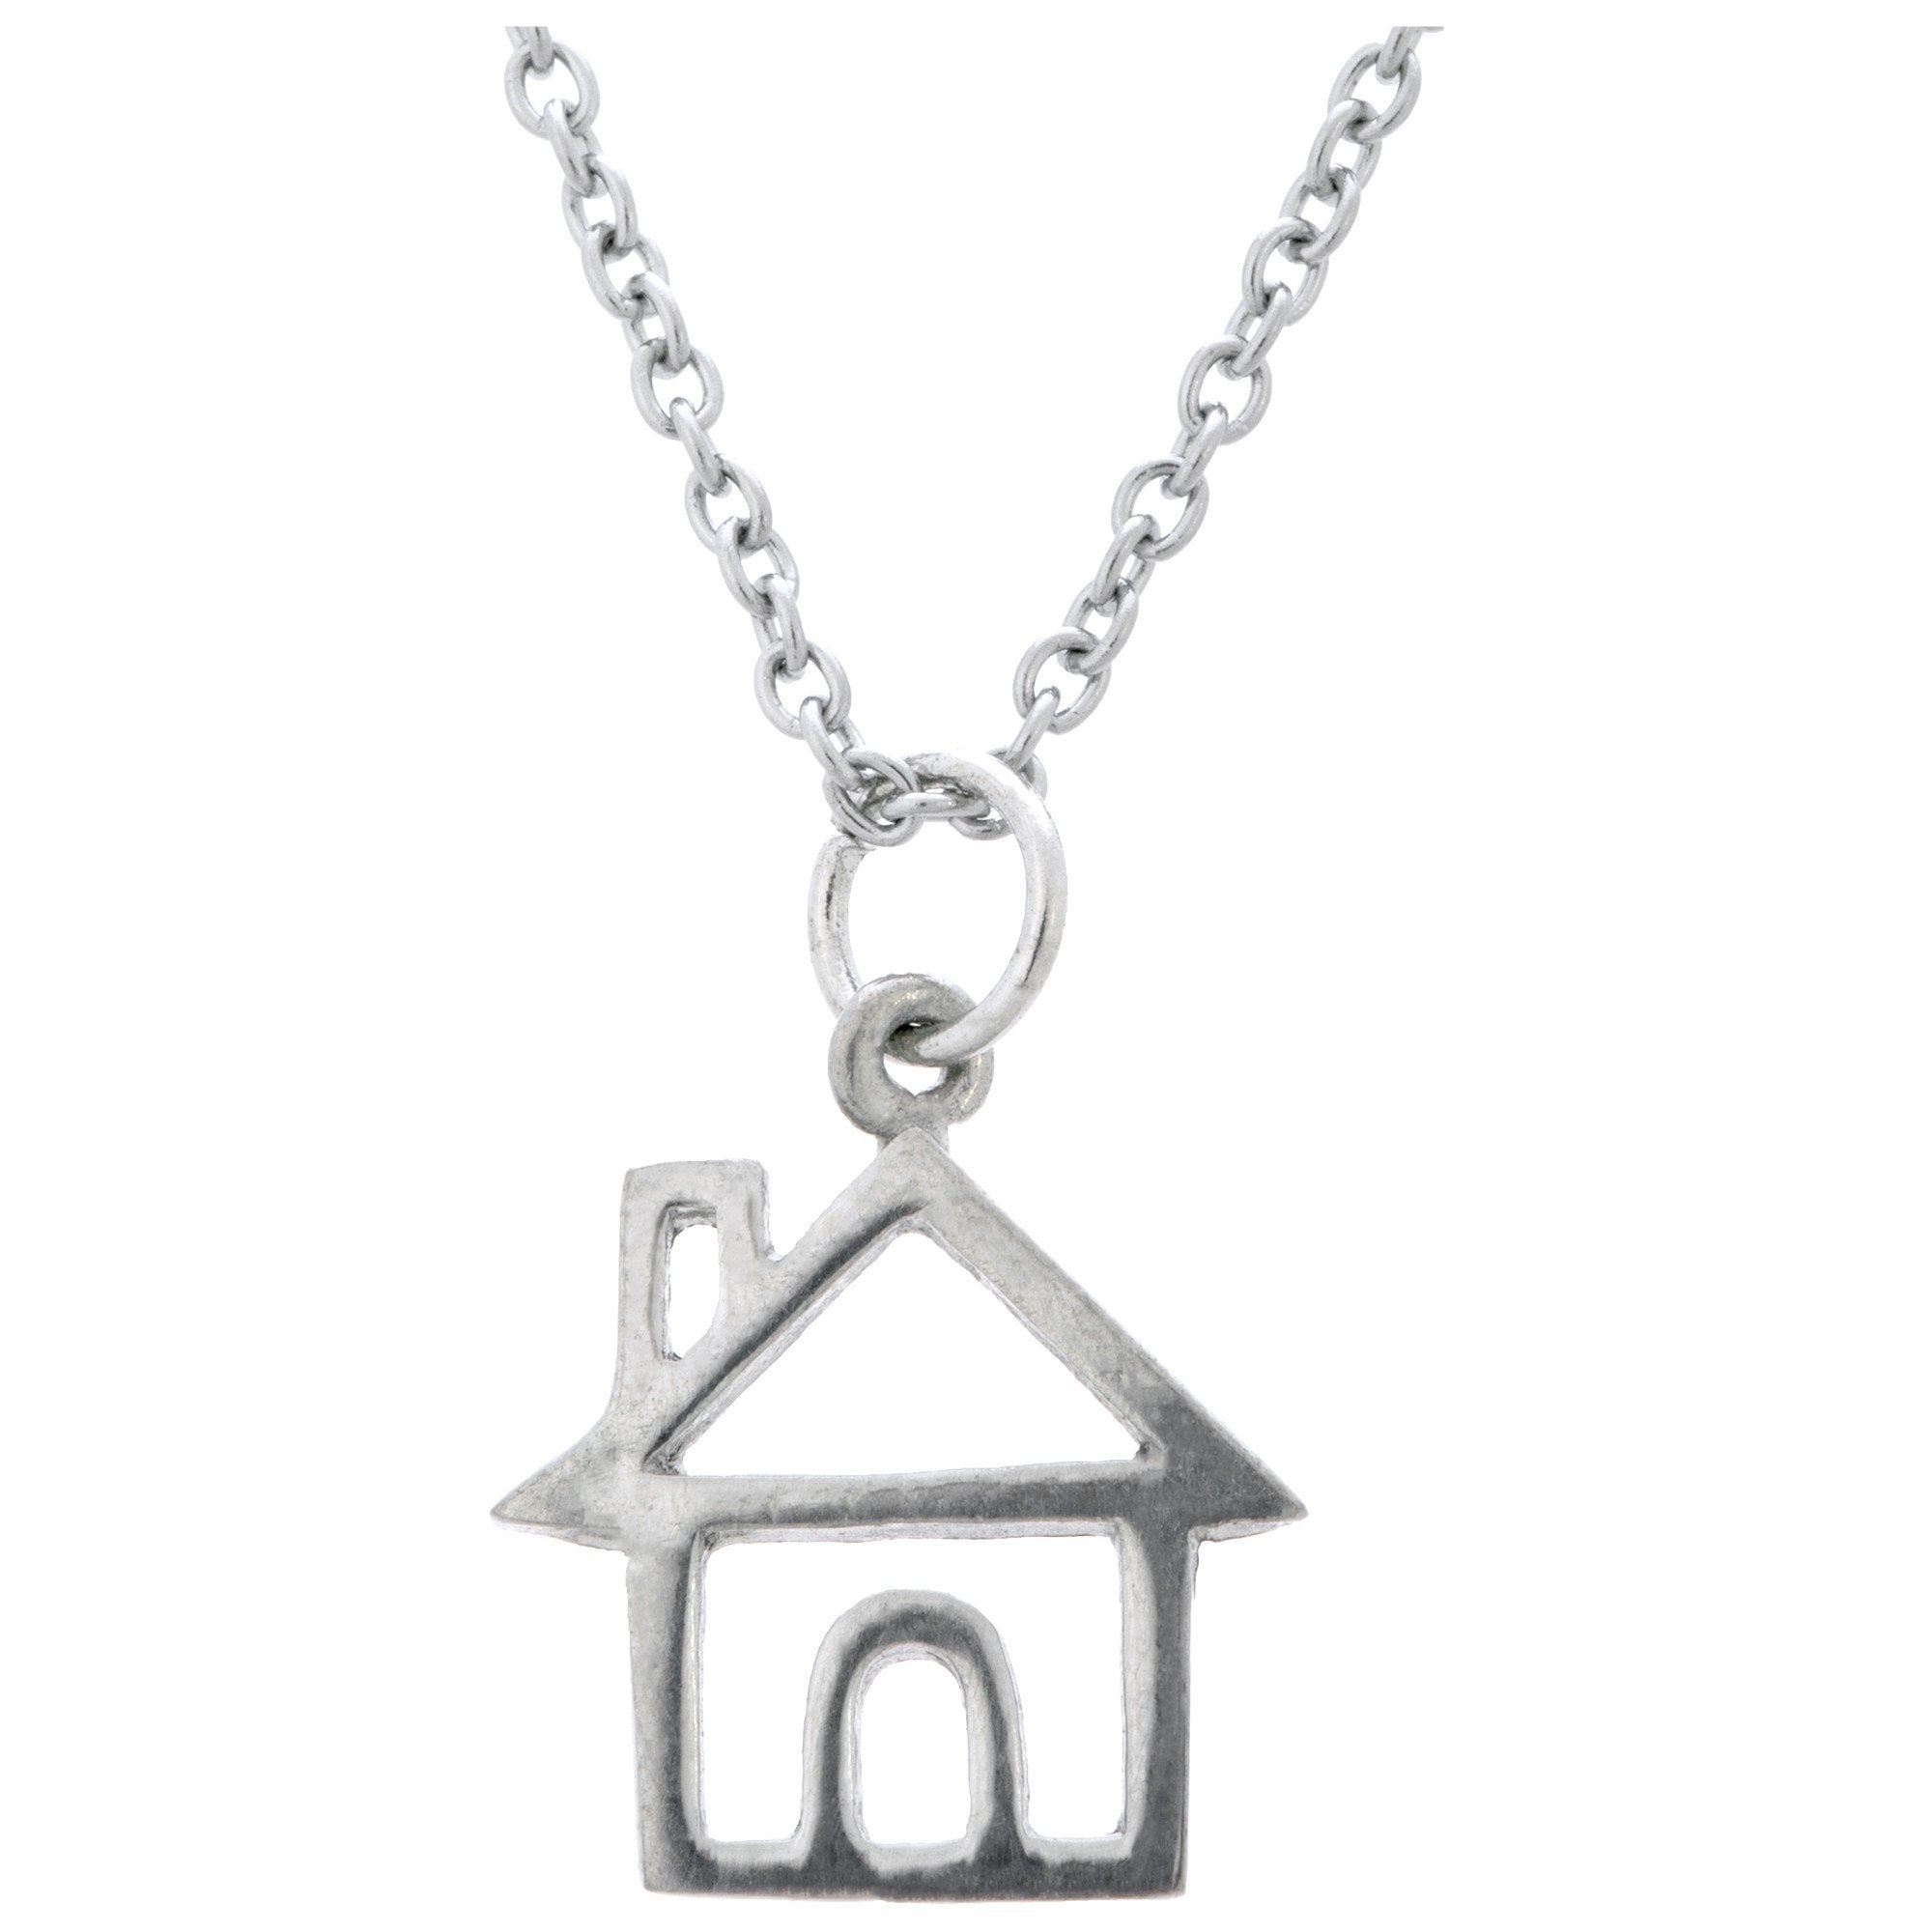 Home Full Of Love Necklace - Bless This Home